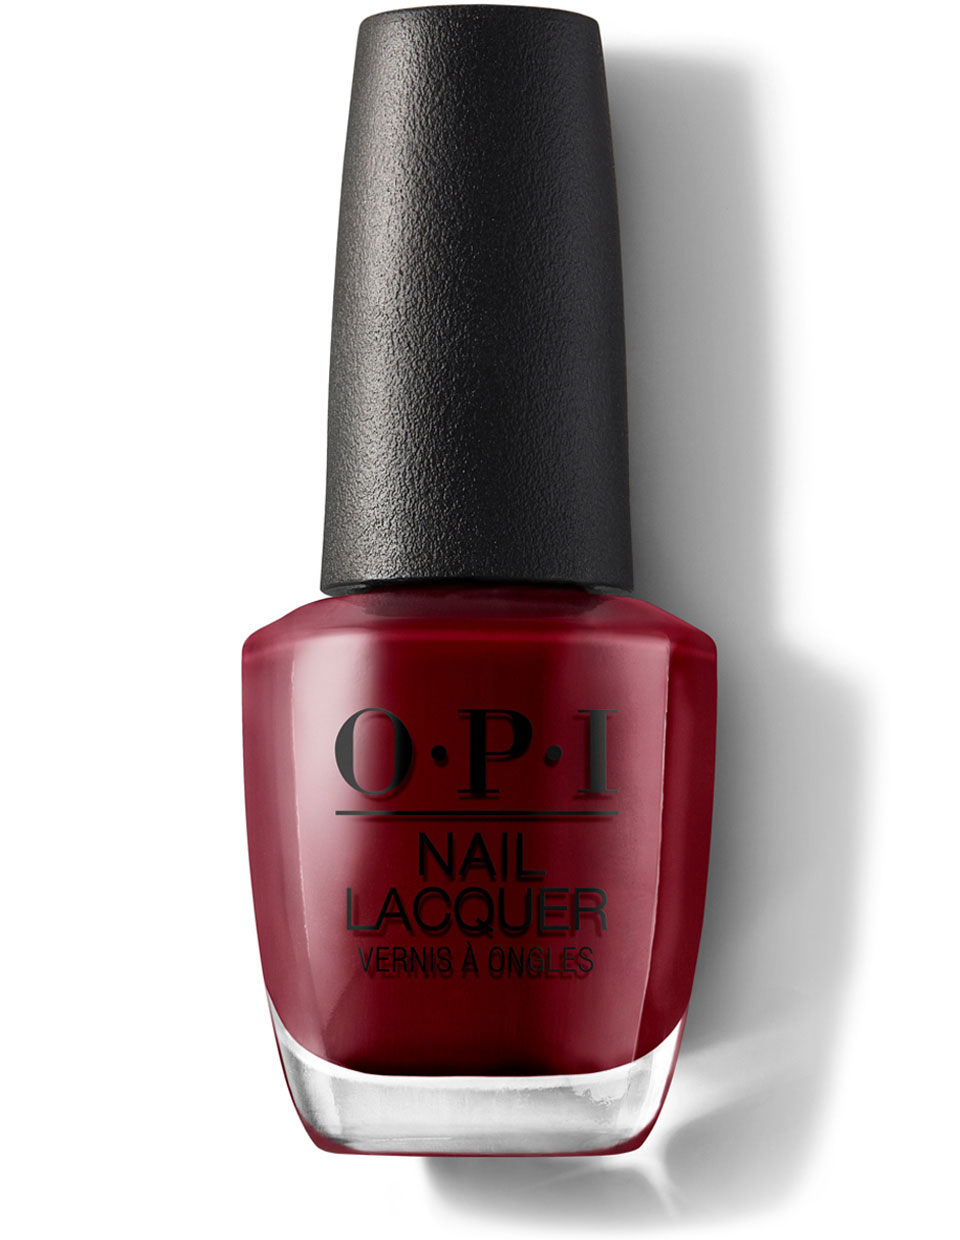 We the Female - Nail Lacquer | OPI